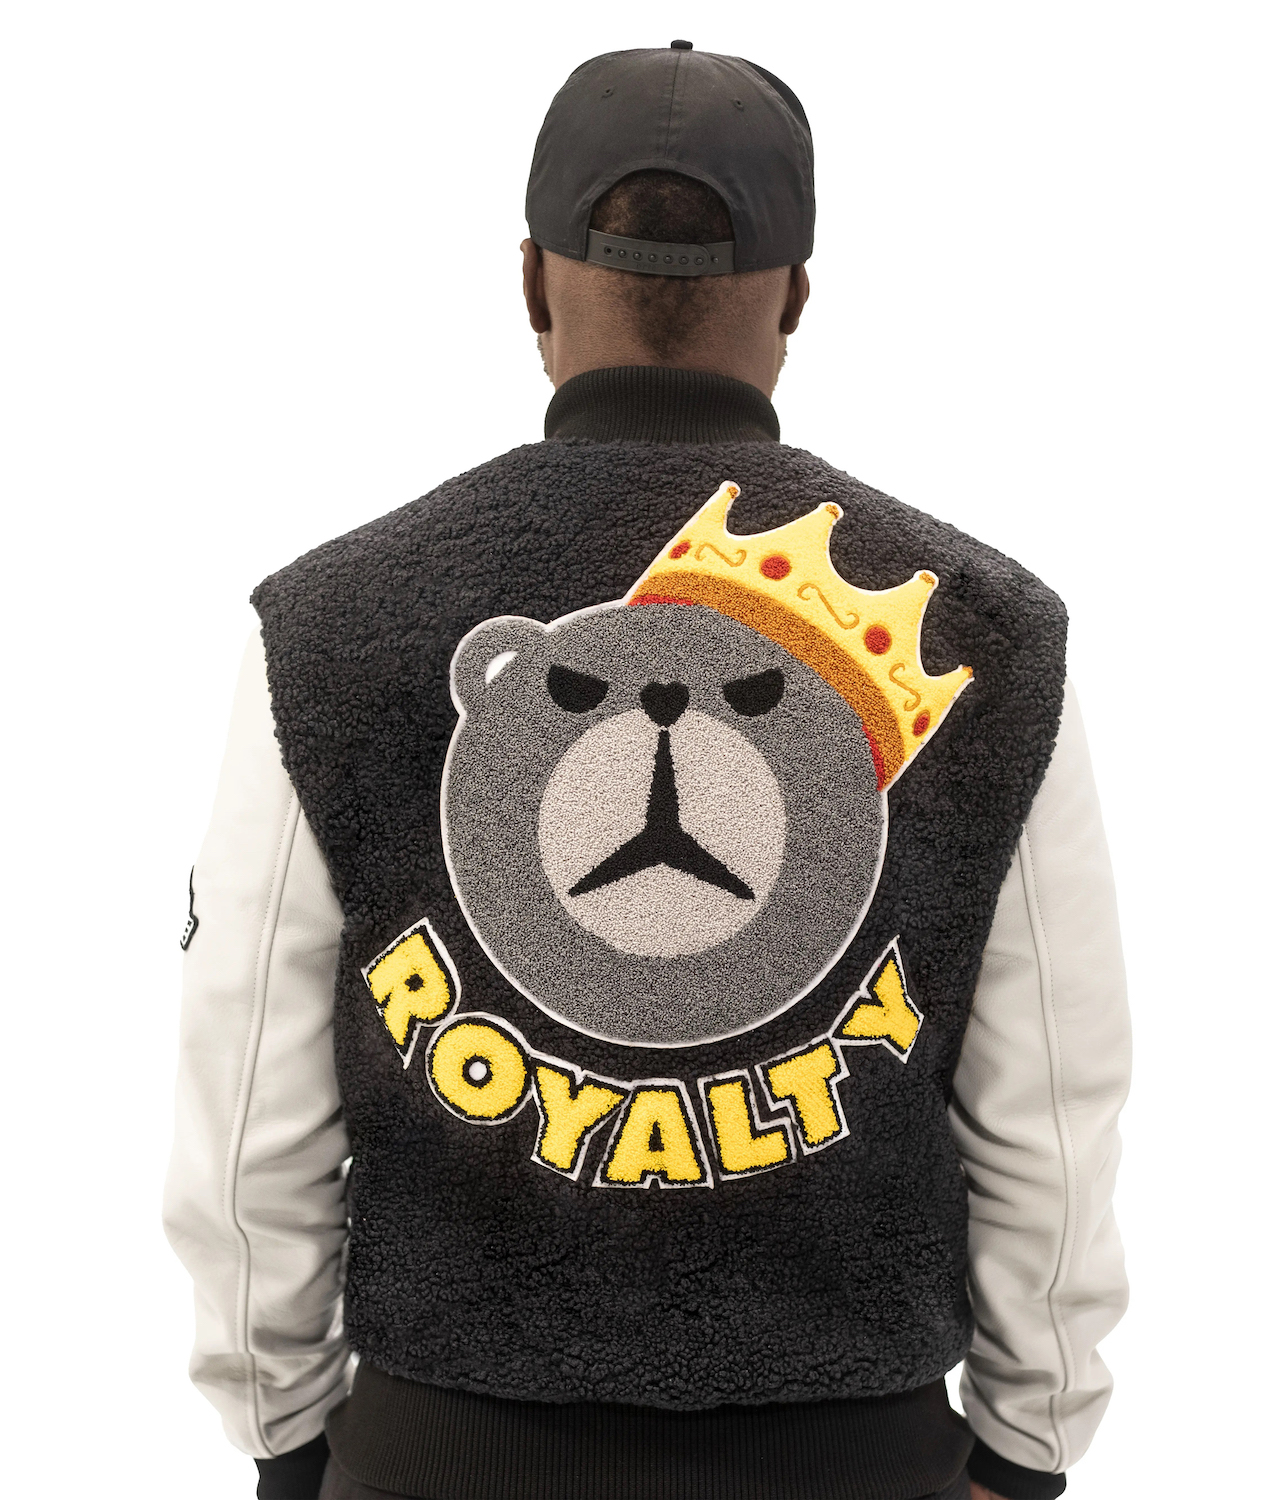  A letterman jacket from the BEAR WITNESS collection.